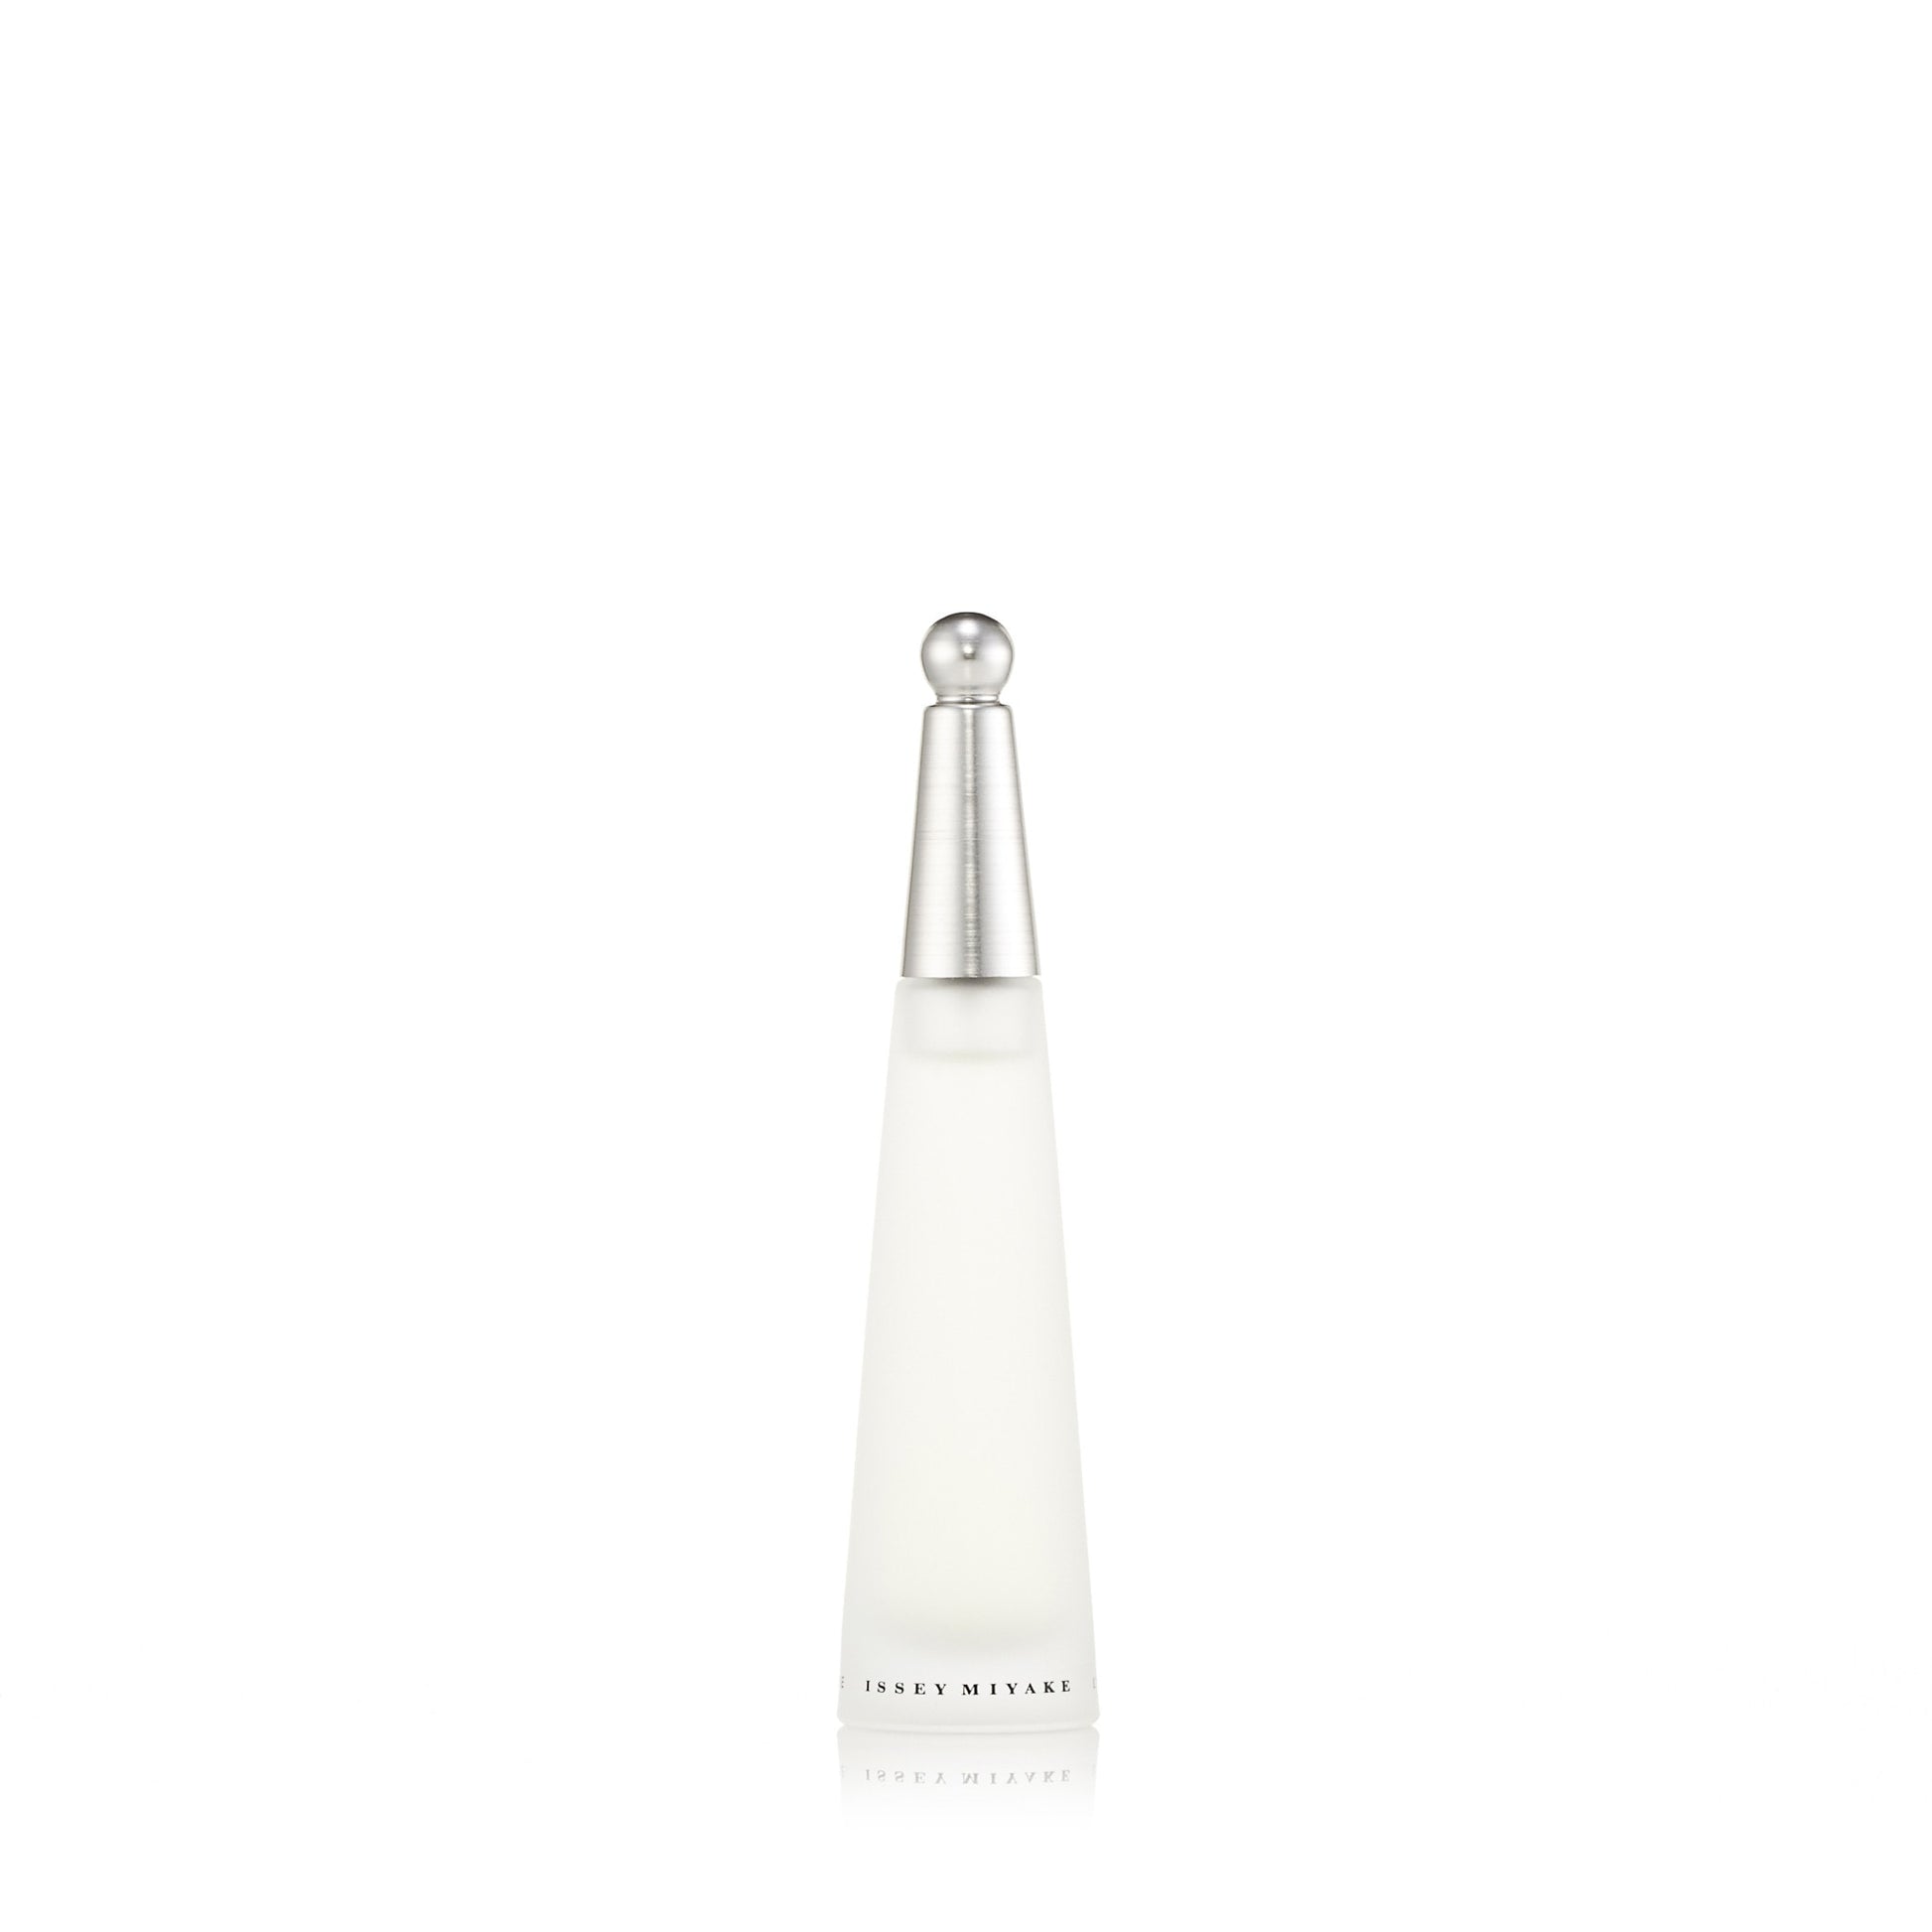 L'Eau Dissey Eau de Toilette Spray for Women by Issey Miyake, Product image 3